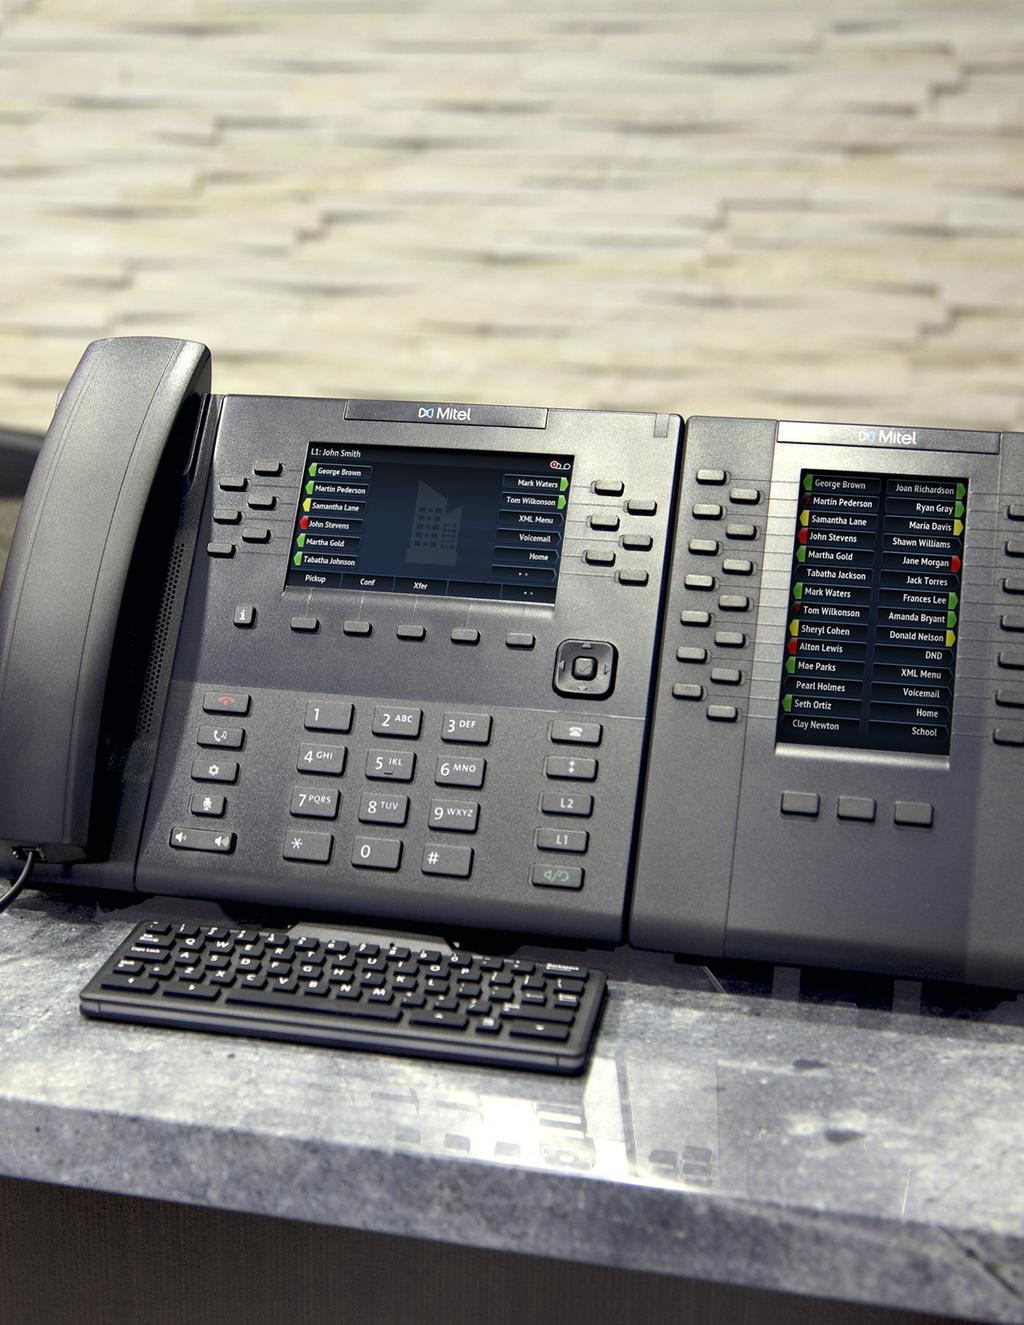 The Mitel 6800 series is a family of powerful and modern SIP Phones offering advanced interoperability with major IP telephony platforms.